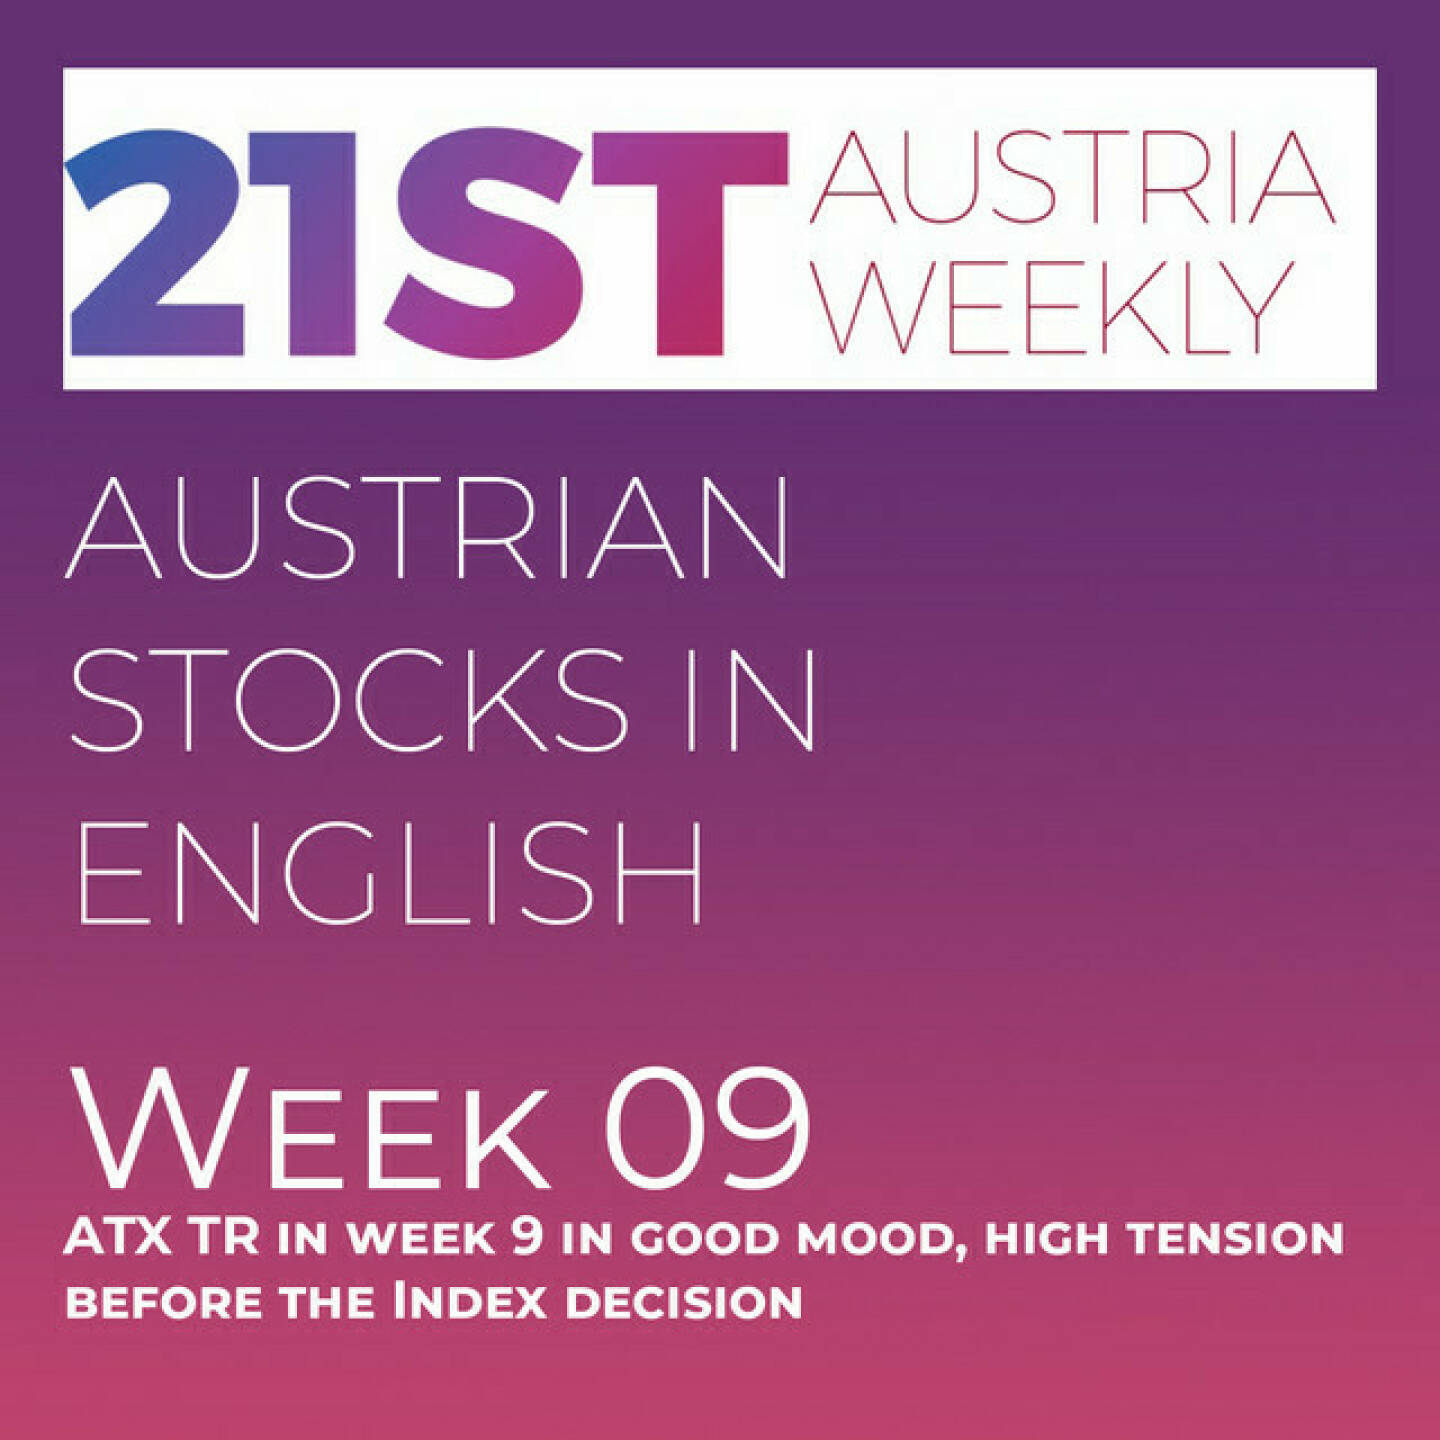 https://open.spotify.com/episode/5MKdw5N1IorNF9L5ATfNEw
Austrian Stocks in English: ATX TR in week 9 in good mood, high tension before the Index decision - <p>Welcome  to &#34;Austrian Stocks in English - presented by Palfinger&#34;, the english spoken weekly Summary for the Austrian Stock Market,  positioned every Sunday in the mostly german languaged Podcast &#34;Audio-CD.at Indie Podcasts&#34;- Wiener Börse, Sport Musik und Mehr“ .<br/><br/>The following script is based on our 21st Austria weekly and in Week 9 we saw another good week for the Austrian Stock Market, ATX TR gained 2,43 percent.  <br/><br/>Based on the February ATX watchlist, Erste Group mentioned that S Immo could eventually replace Strabag in the ATX as it has surpassed Strabag by trading volume and also again lists among the top 25 Austrian companies in terms of free float market cap. <br/><br/>For the ATX five Erste Group does not expect any change, as voestalpine surpassed Andritz only by a tiny margin based on the average free float market cap for February.  voestalpine finished January and also February as the best performing Member in the ATX. <br/><br/>News came from Wienerberger, RHI Magnesita, OMV, Erste Group, Porr, Vienna Airport, ams Osram, Semperit, Uniqa, Valneva and UBM, spoken by the absolutely smart Alison. <br/><br/>Please rate my Podcast on Apple Podcasts (or Spotify): <a href=https://podcasts.apple.com/at/podcast/audio-cd-at-indie-podcasts-wiener-boerse-sport-musik-und-mehr/id1484919130 target=_blank>https://podcasts.apple.com/at/podcast/audio-cd-at-indie-podcasts-wiener-boerse-sport-musik-und-mehr/id1484919130</a> .And please spread the word : <a href=https://www.boerse-social.com/21staustria target=_blank>https://www.boerse-social.com/21staustria</a> - the address to subscribe to the weekly summary as a PDF.</p>